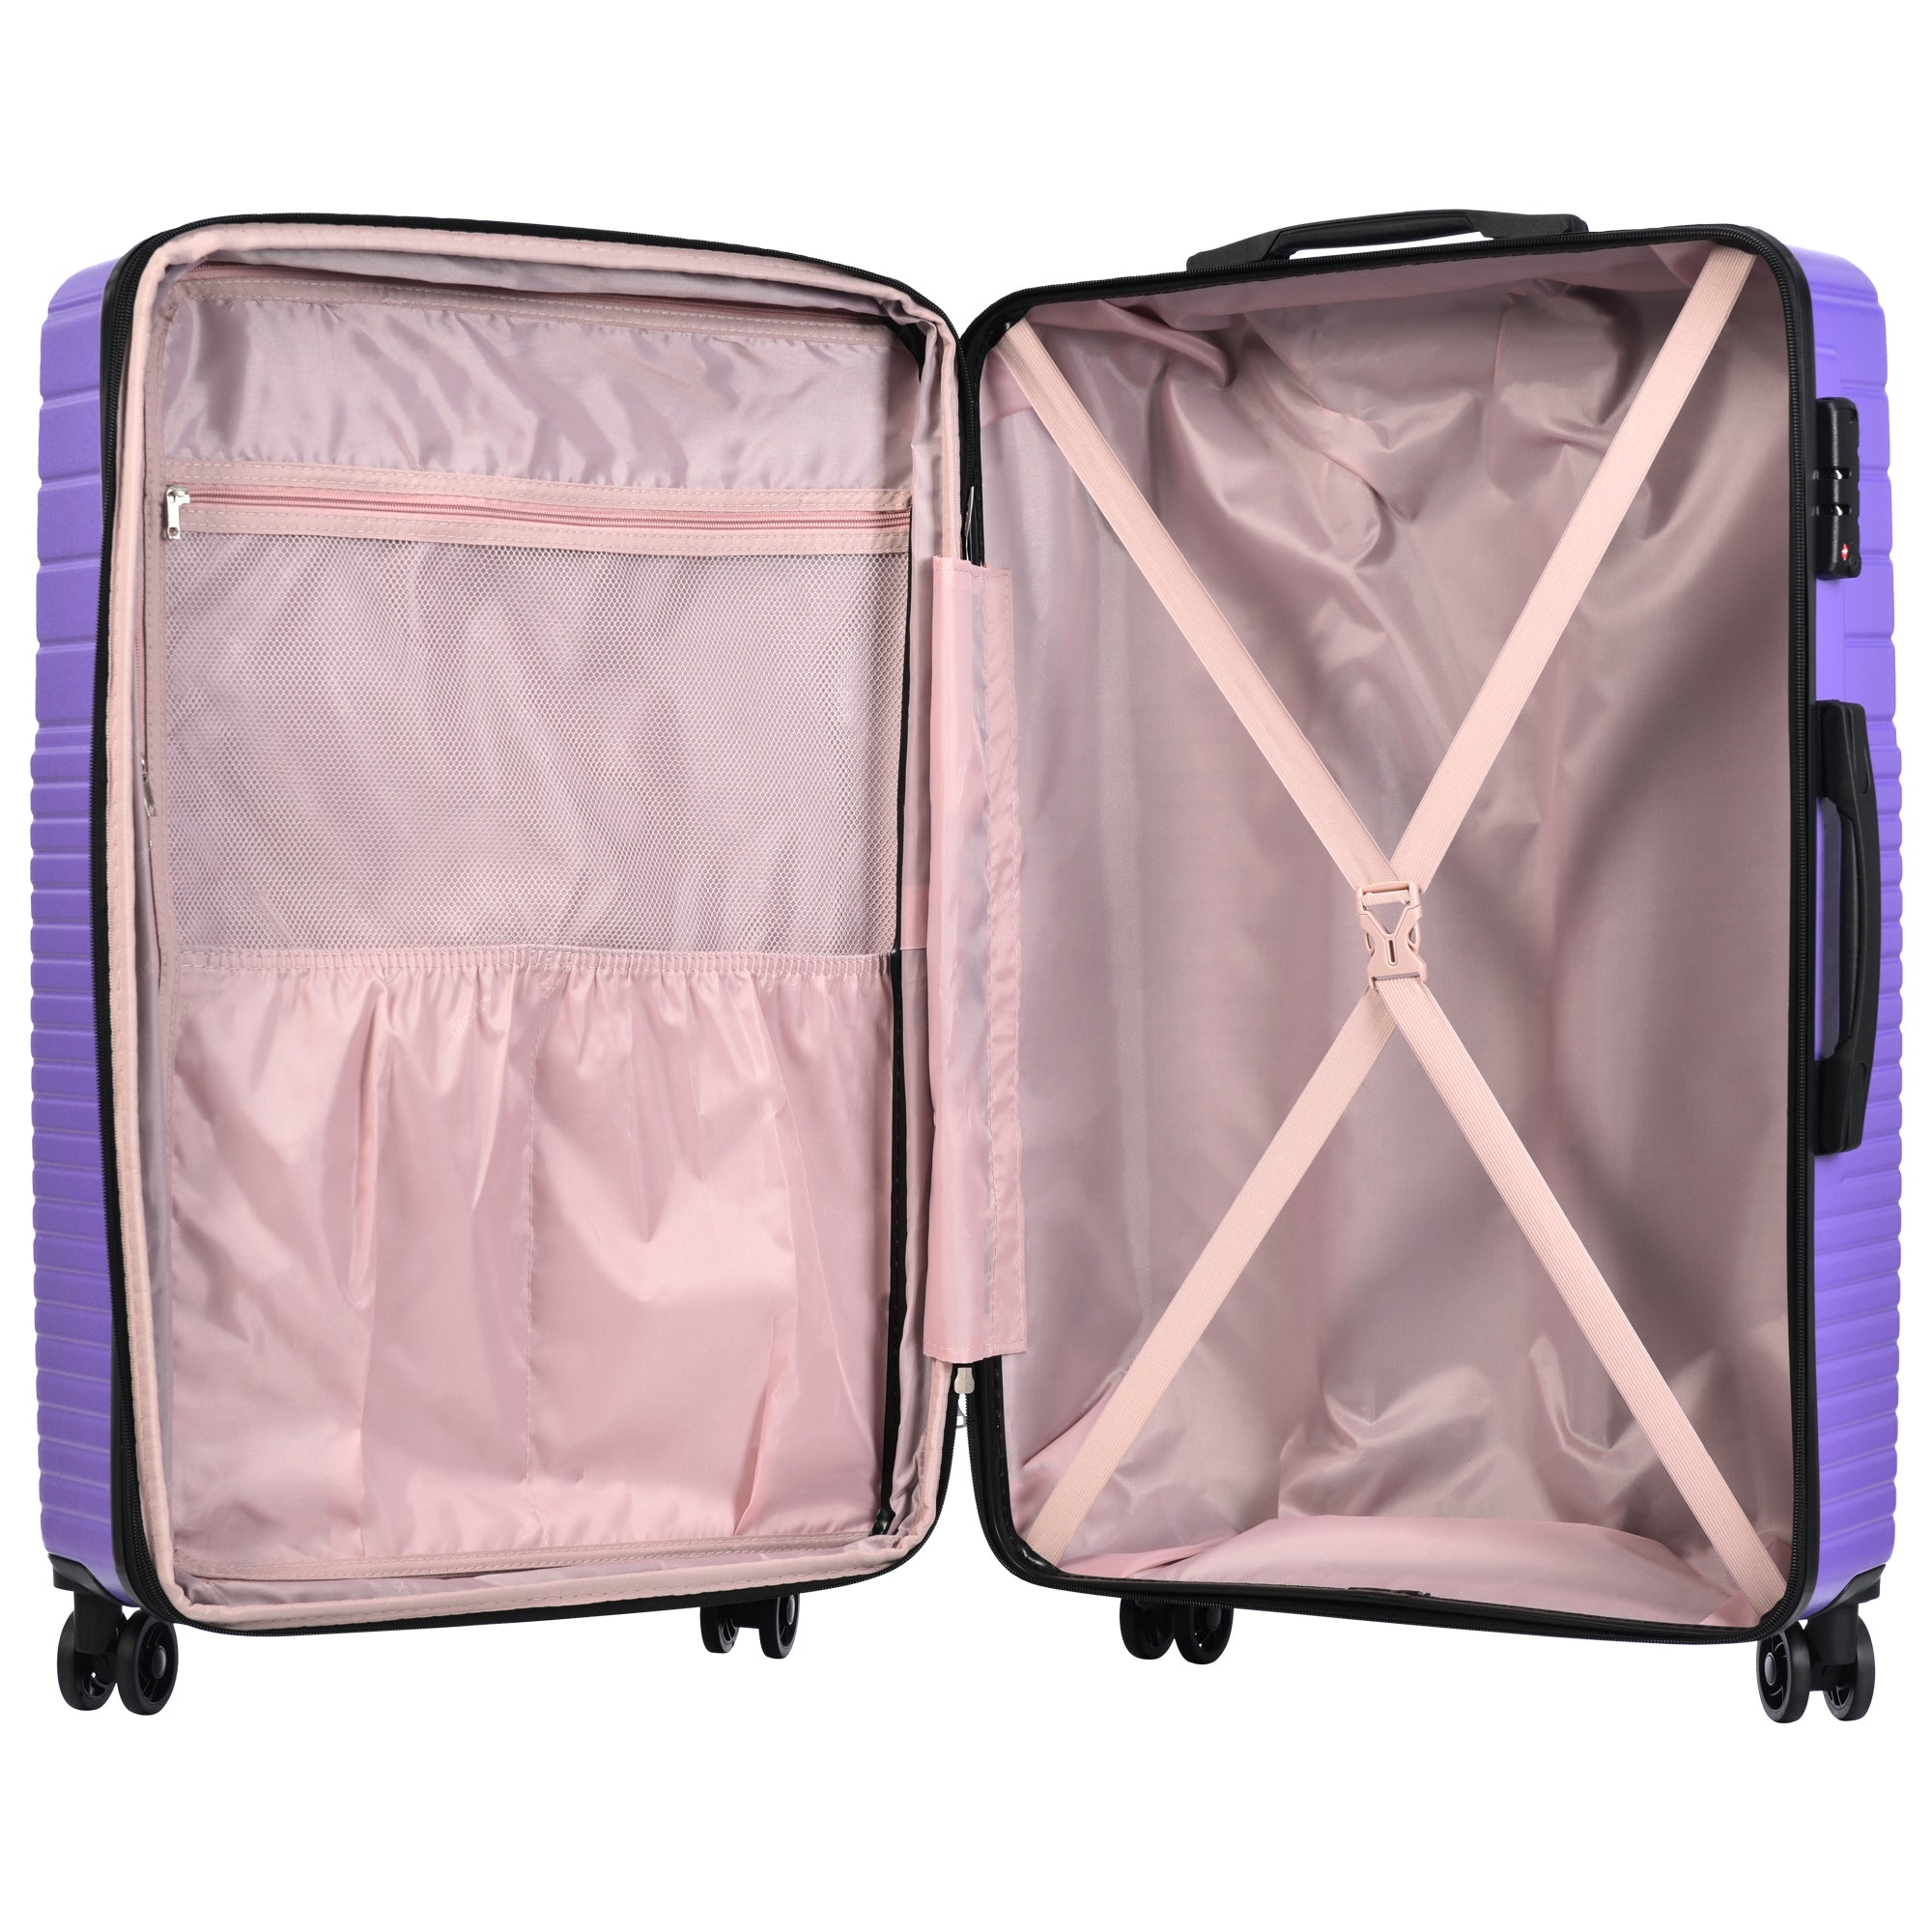 Hardshell Luggage Sets 3 Piece double spinner 8 wheels purple-abs